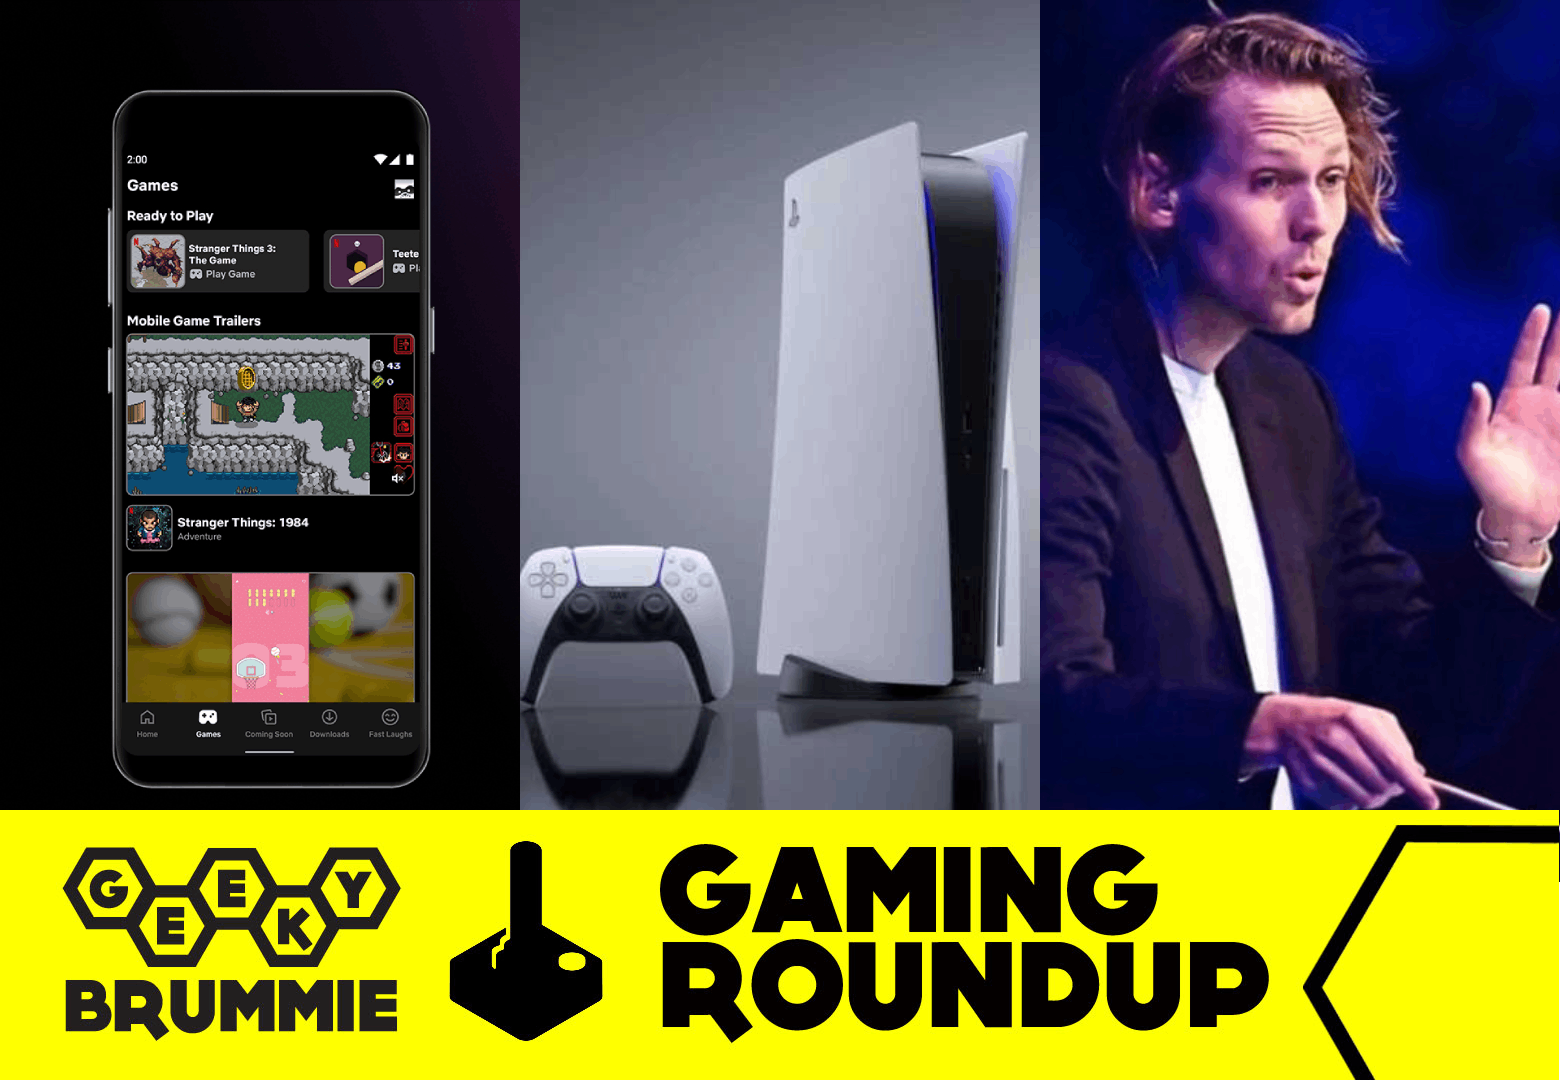 Gaming Roundup – Are Games in Trouble?